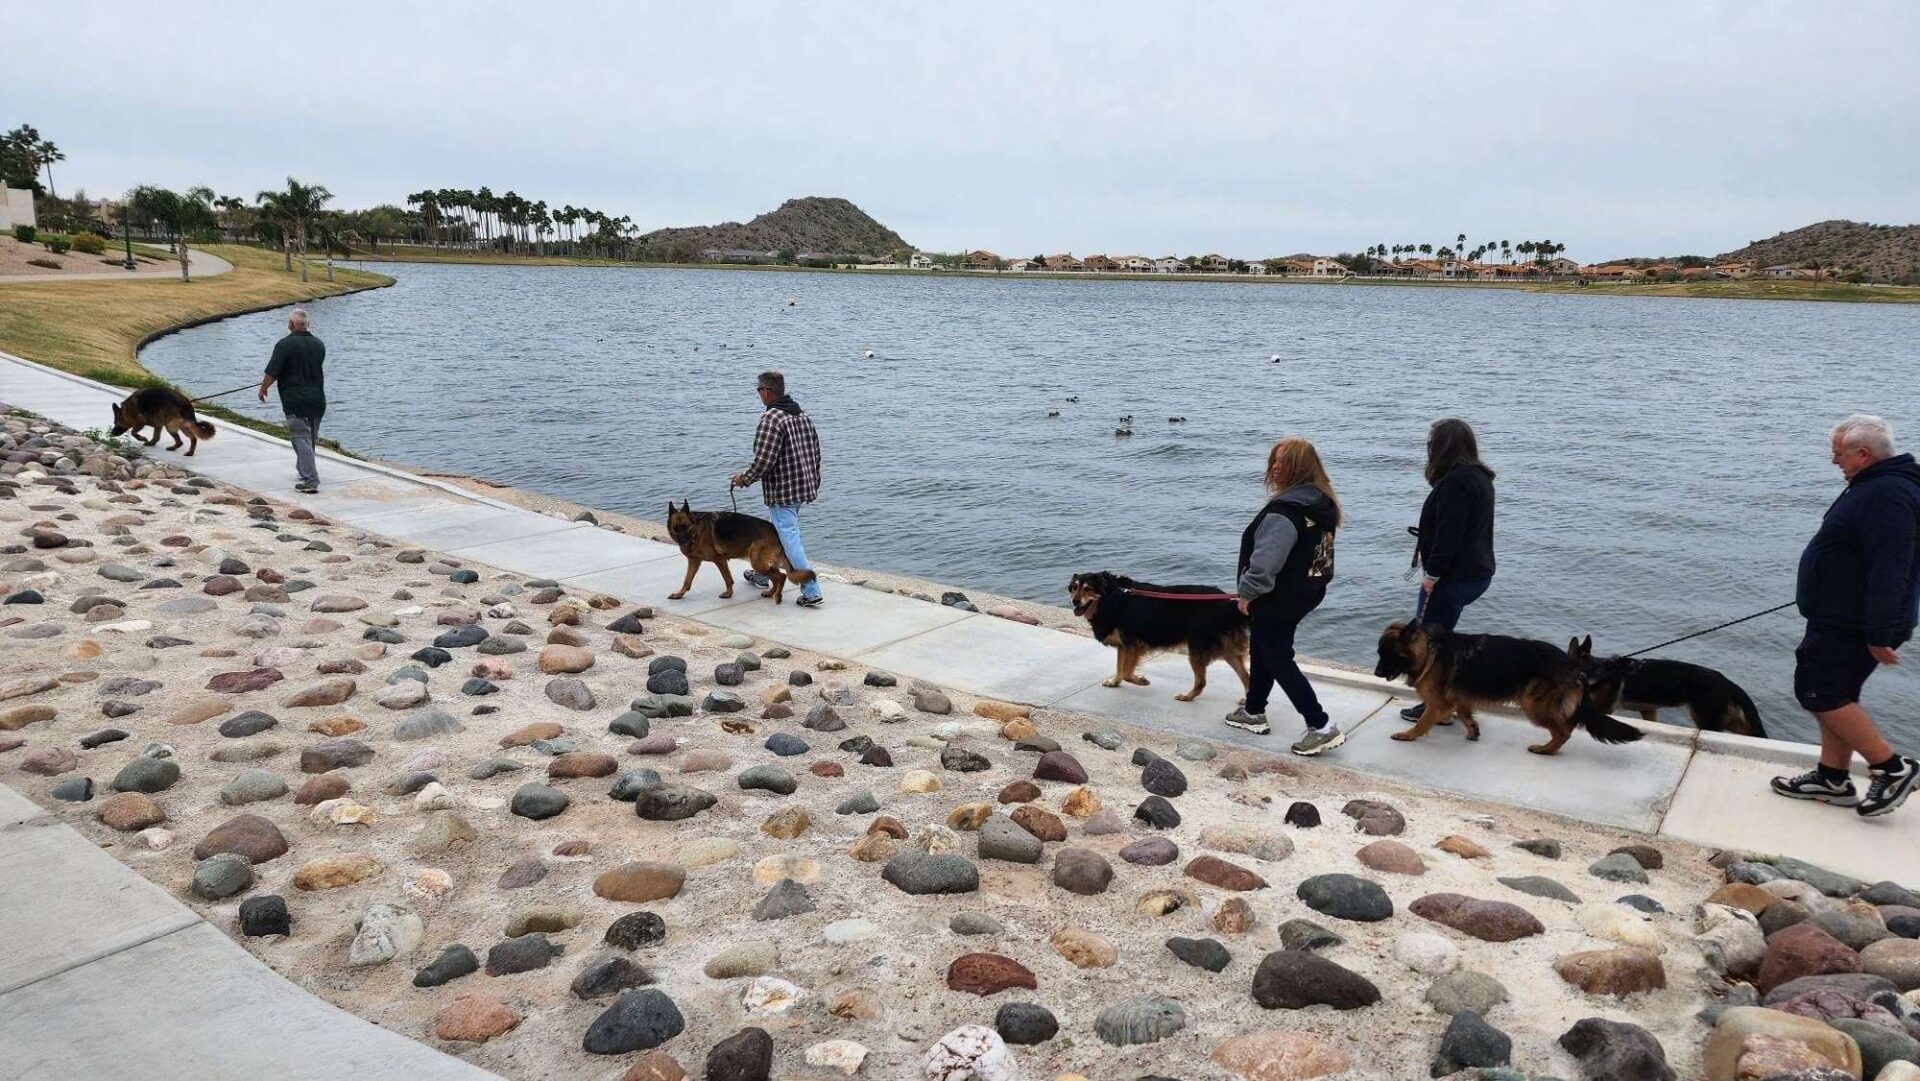 A group of people walking their dogs on the beach.